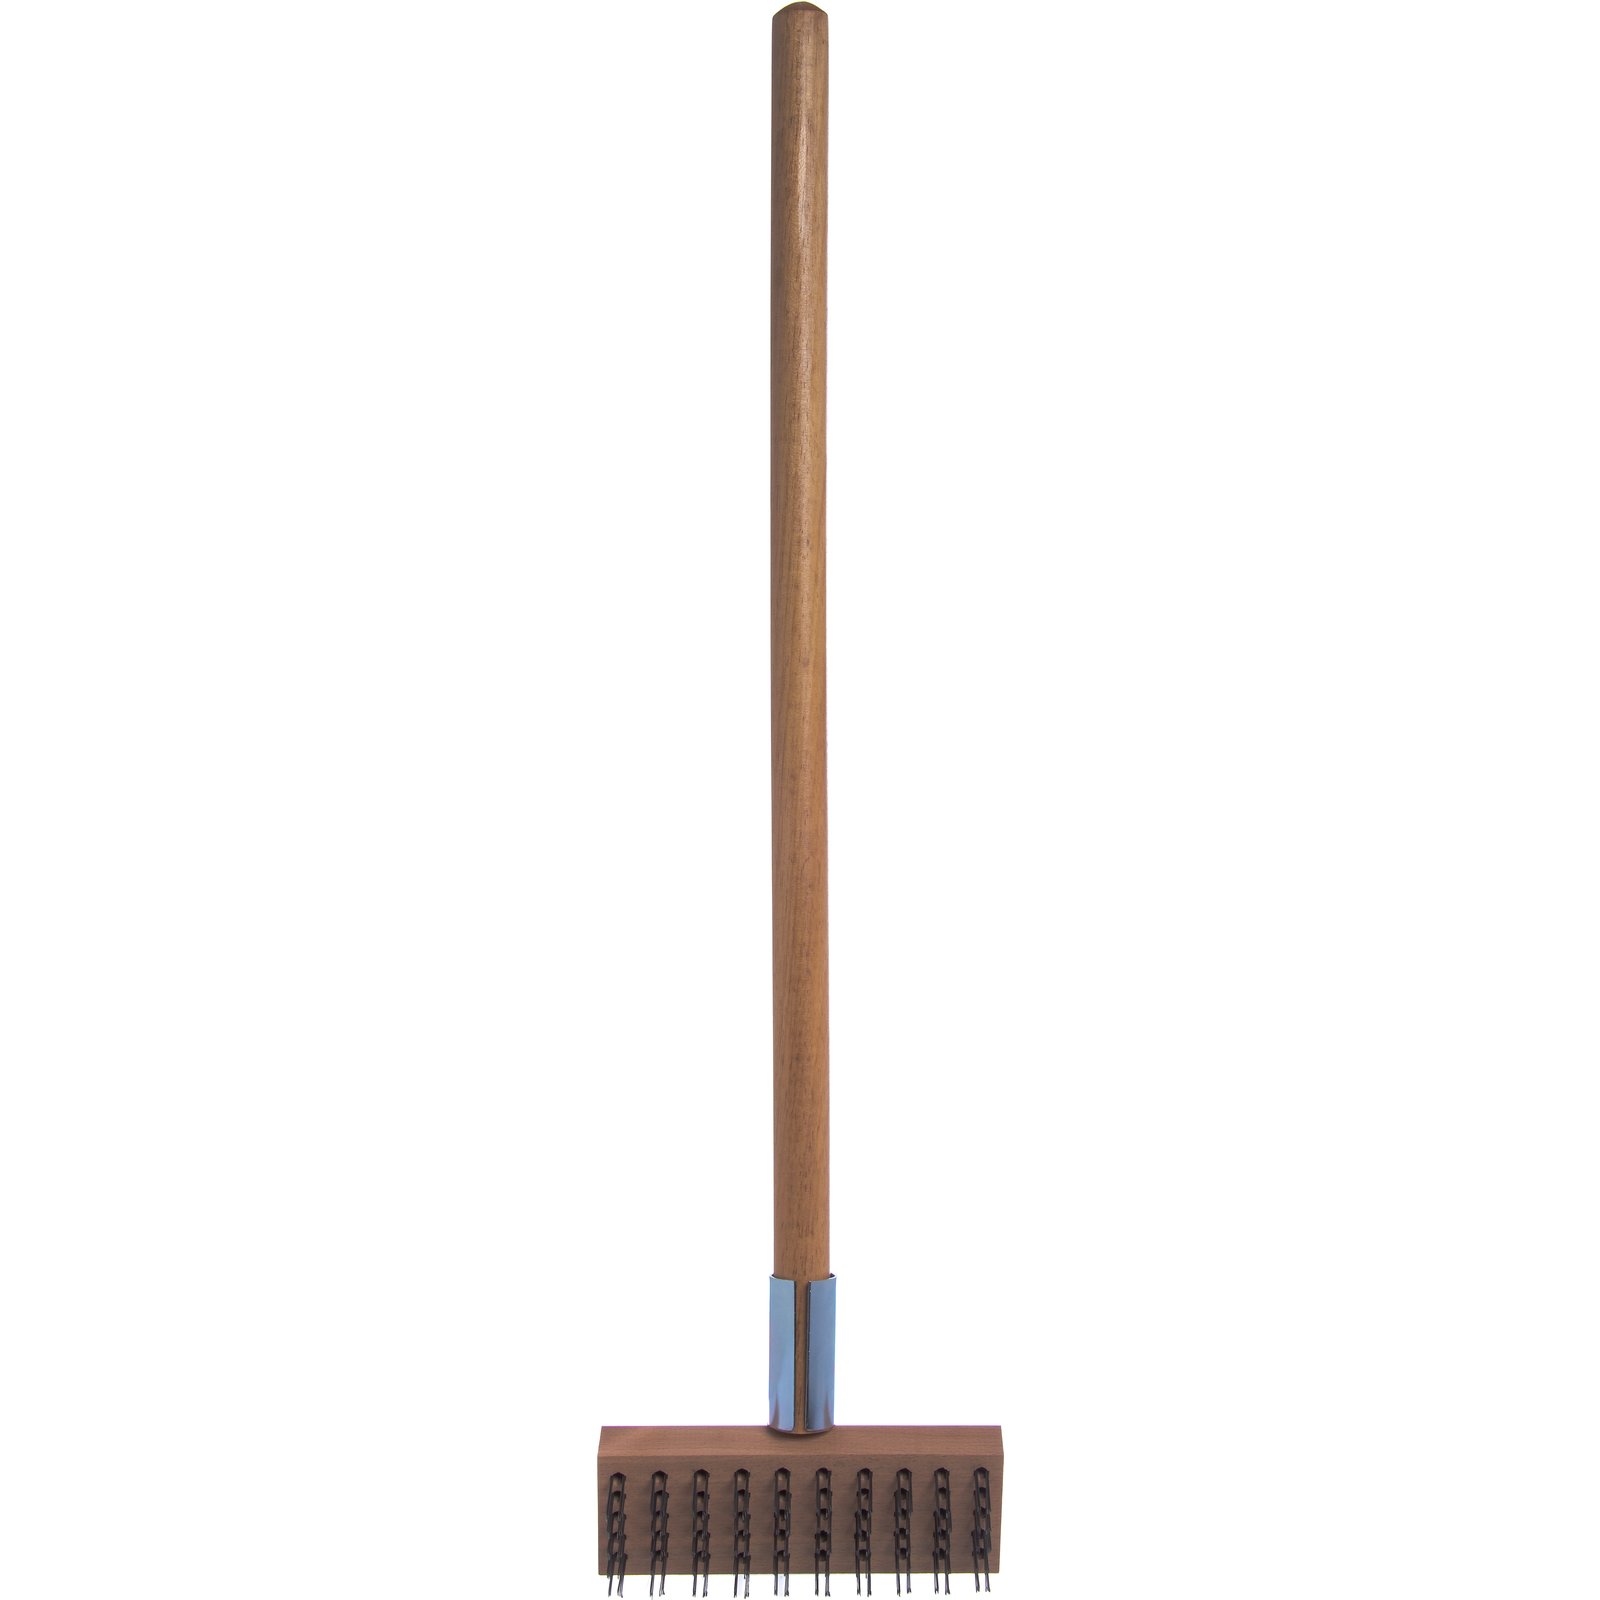 36372500 - Oven Grill Brush & Scraper with Handle 30 - Natural